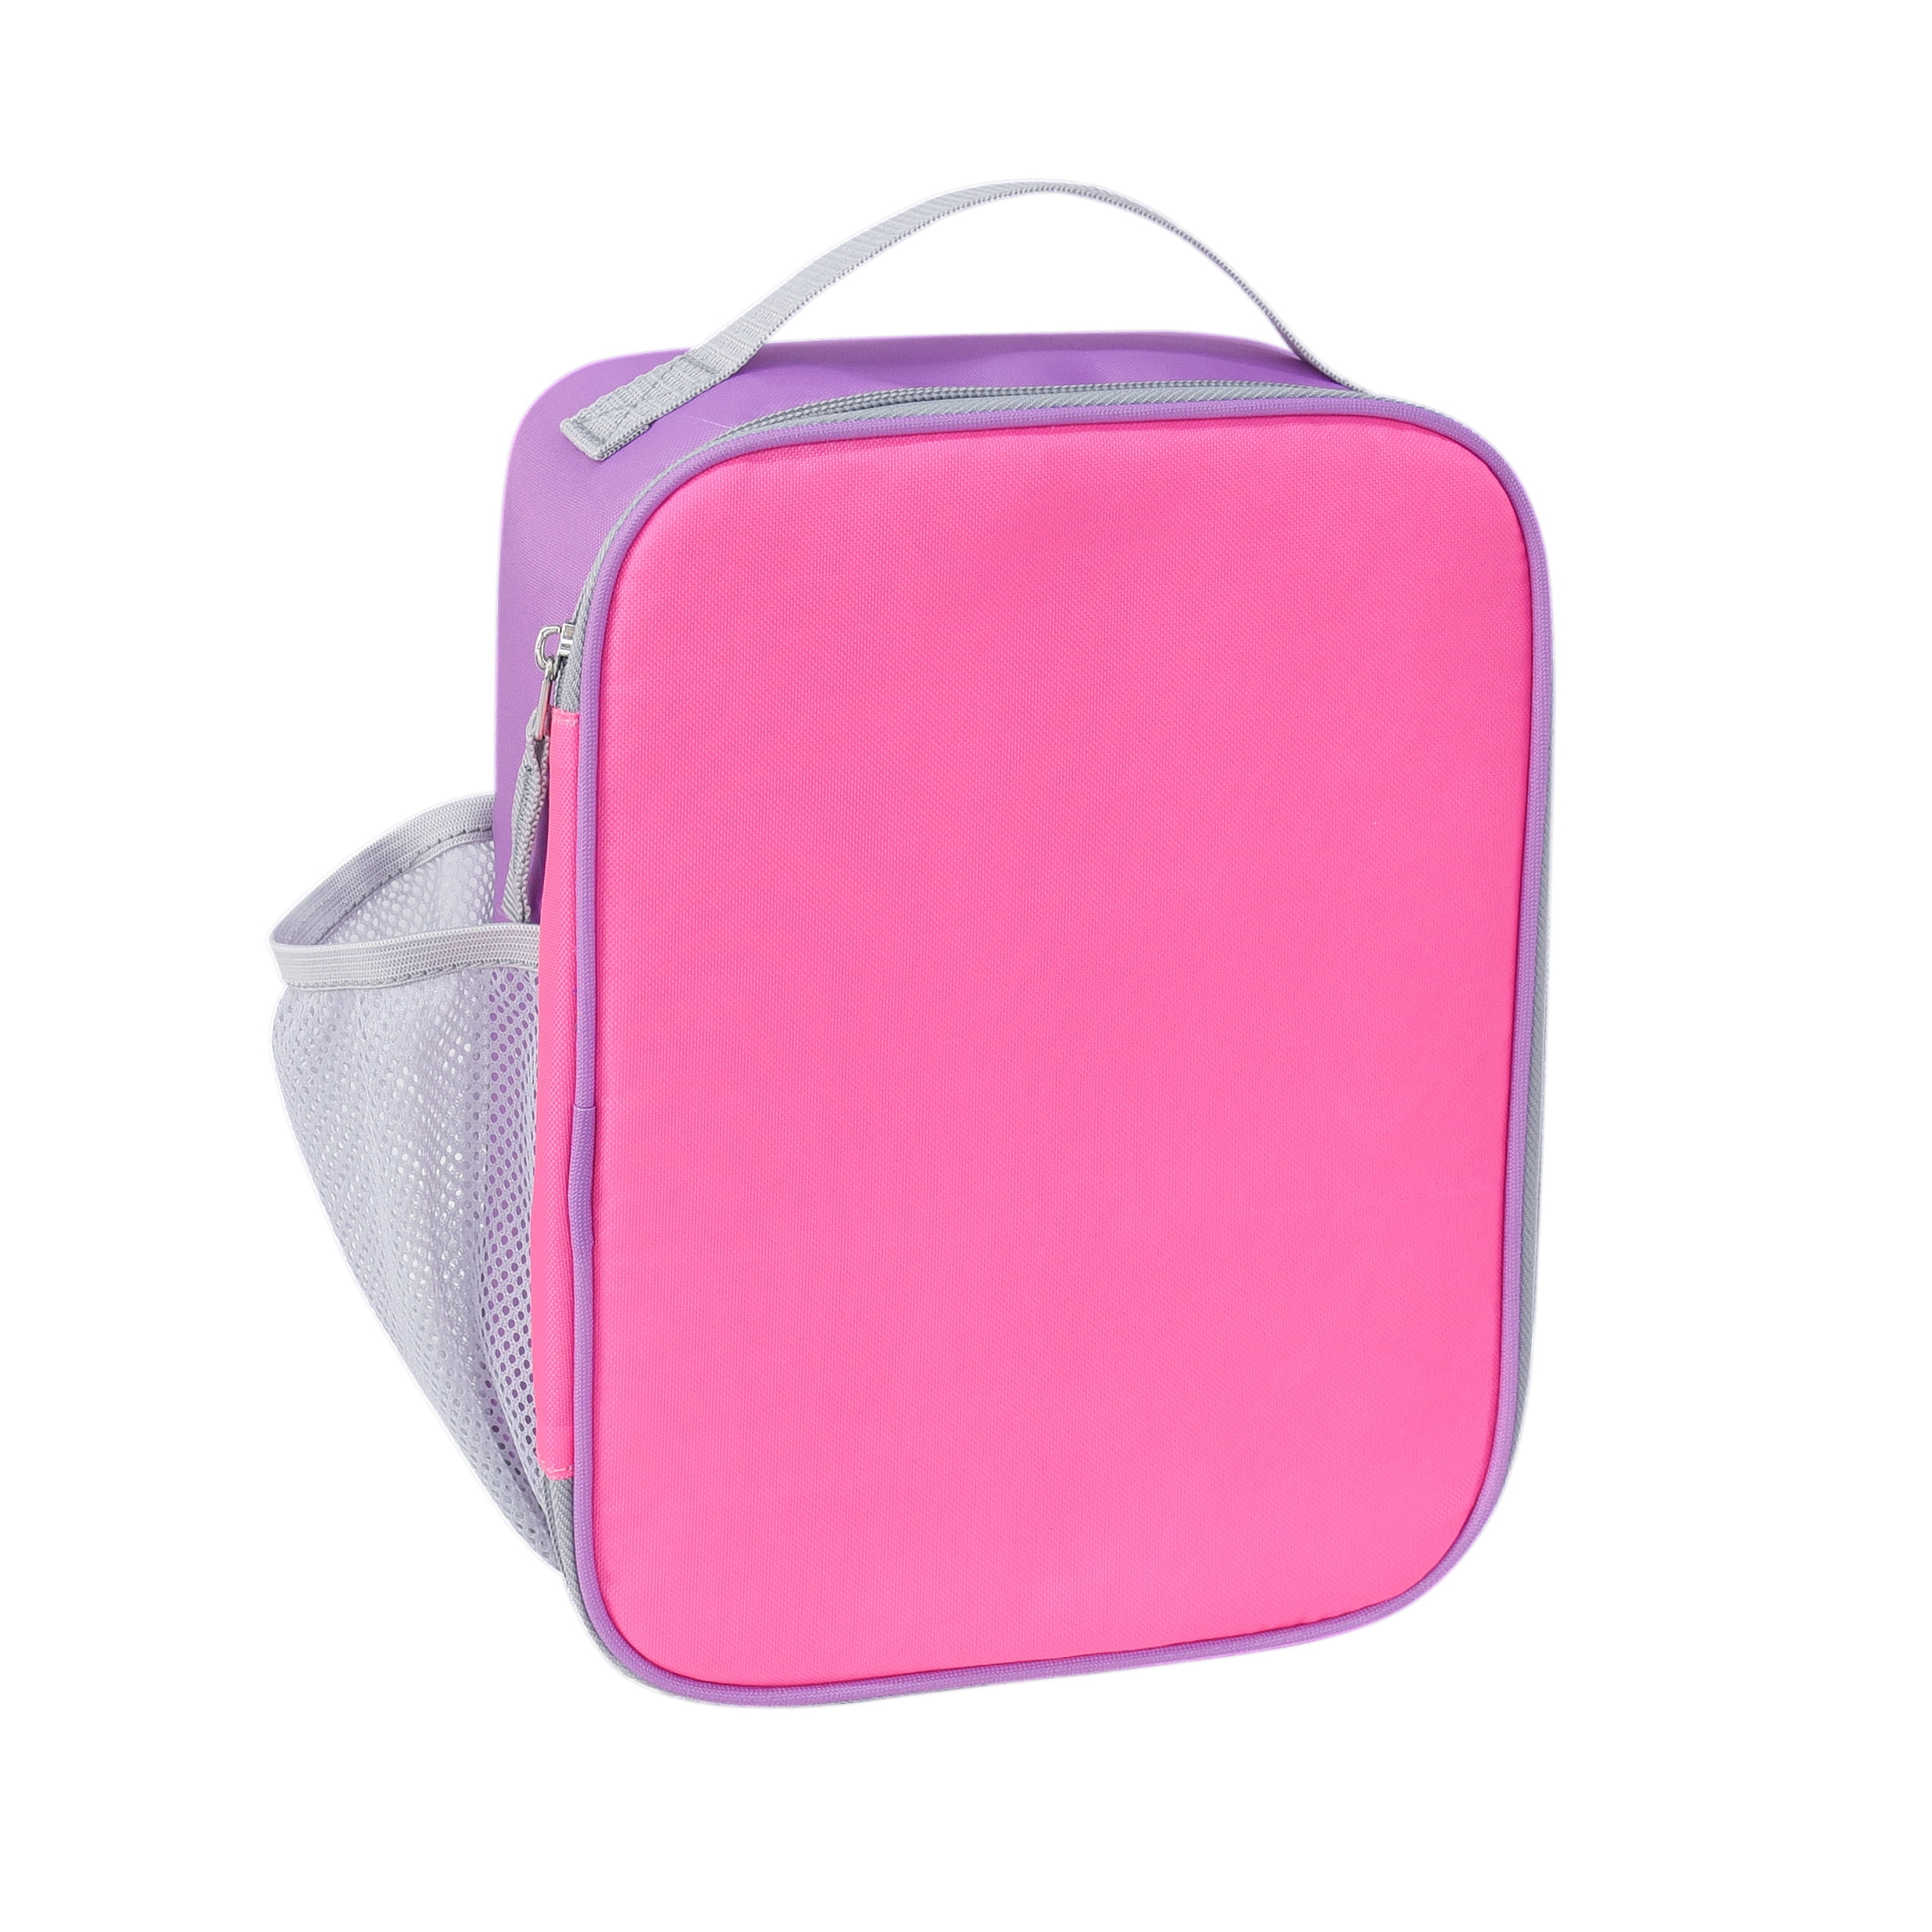 Your Zone, Reusable Lunch Bag/Insulated Lunch Kit/Classic Lunch Box ...